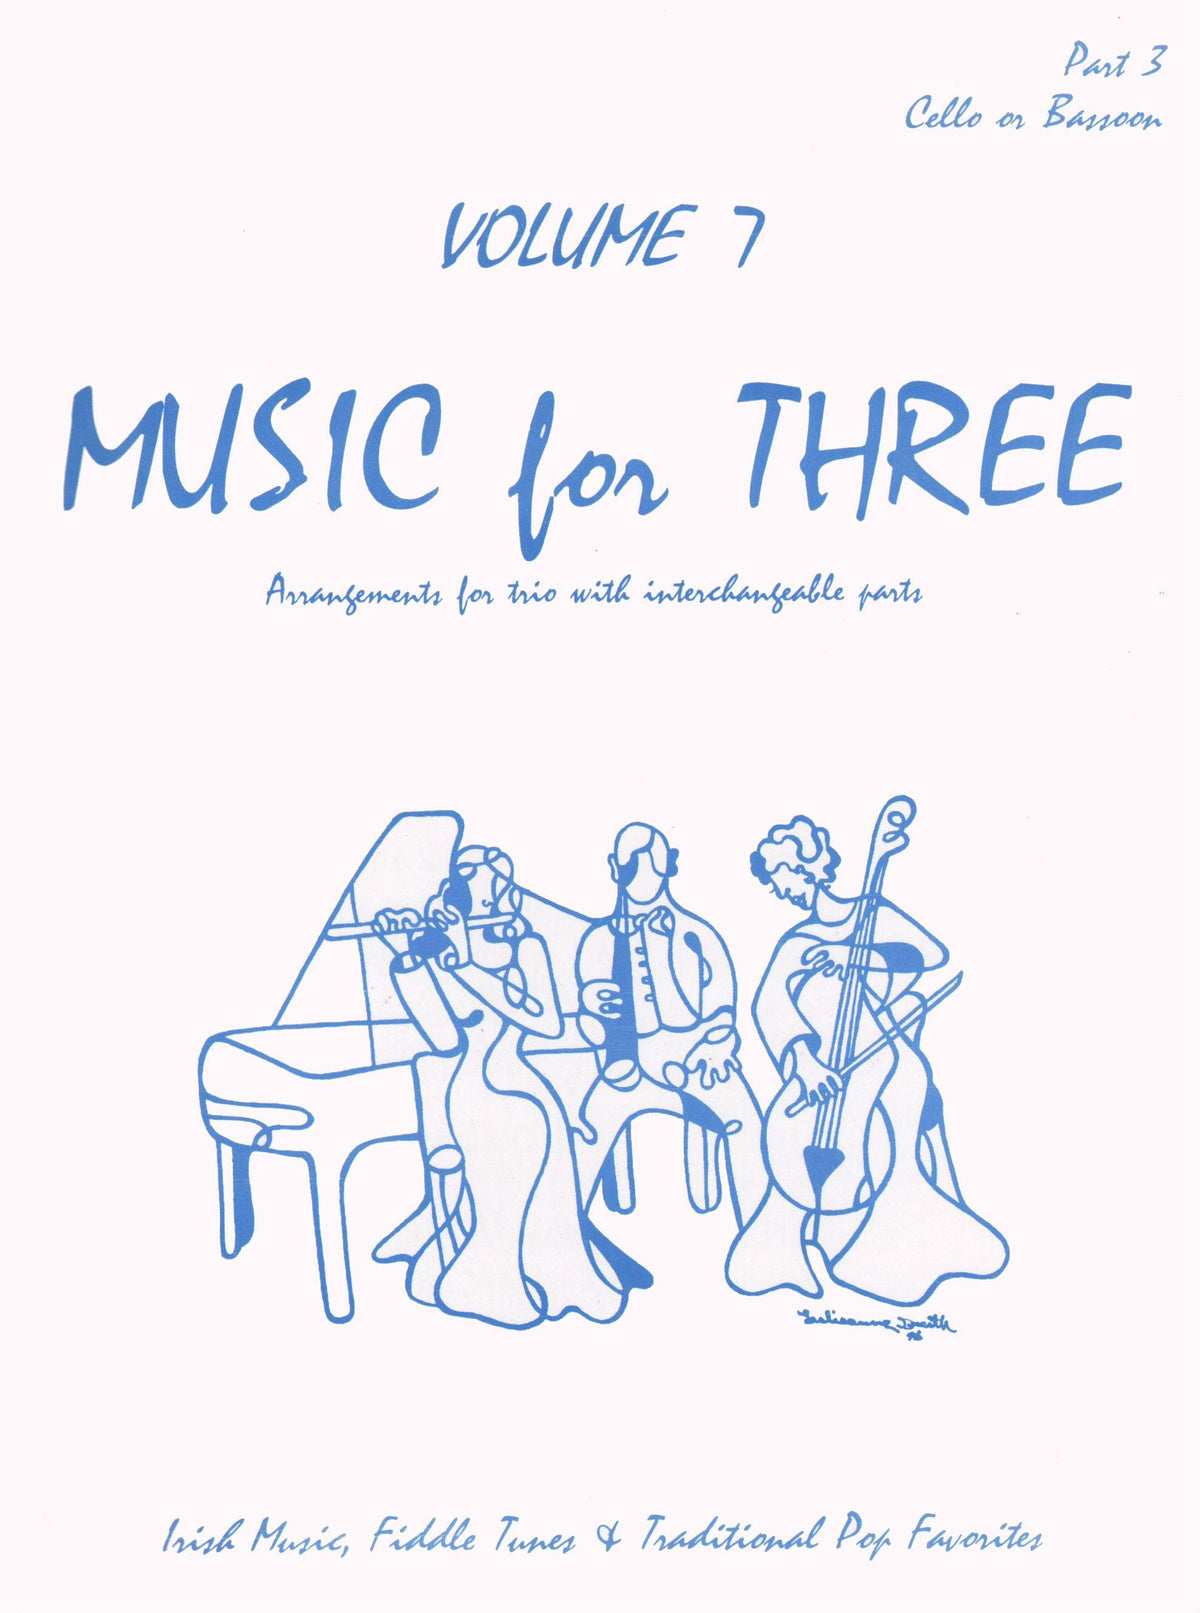 Music for Three, Volume 7, Part 3, Cello or Bassoon Published by Last Resort Music